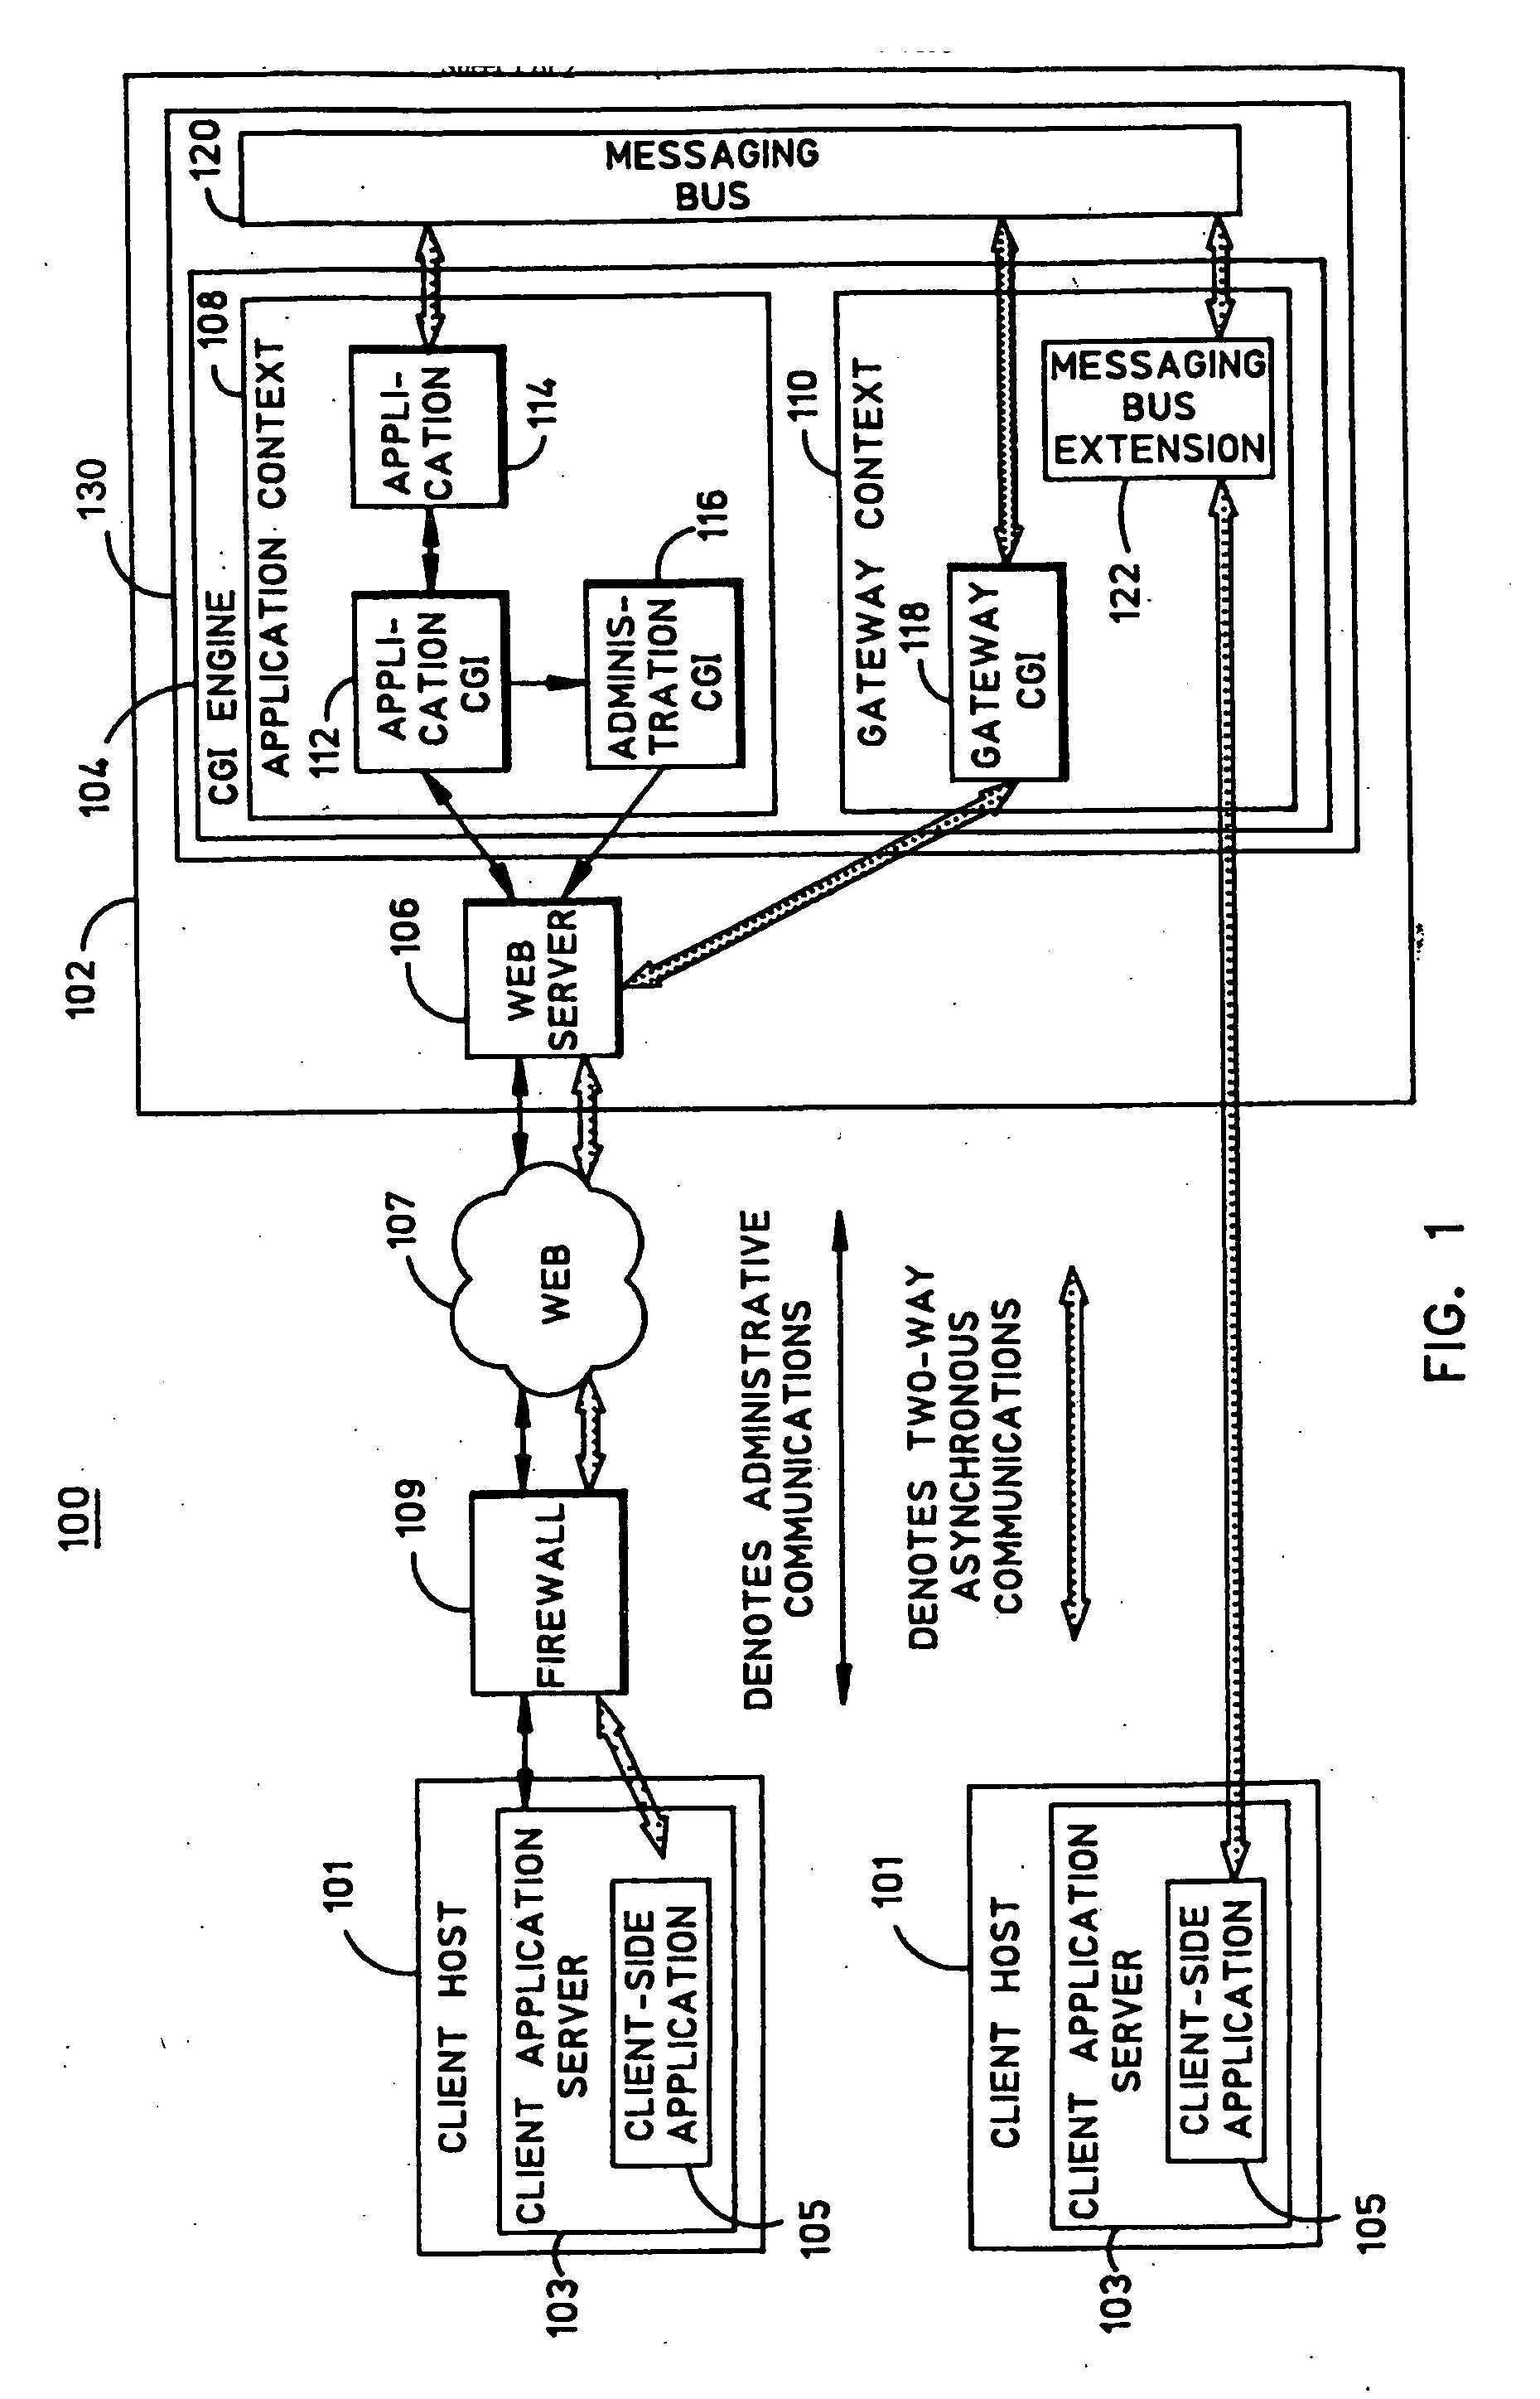 System and method for collaborative processing of distributed applications